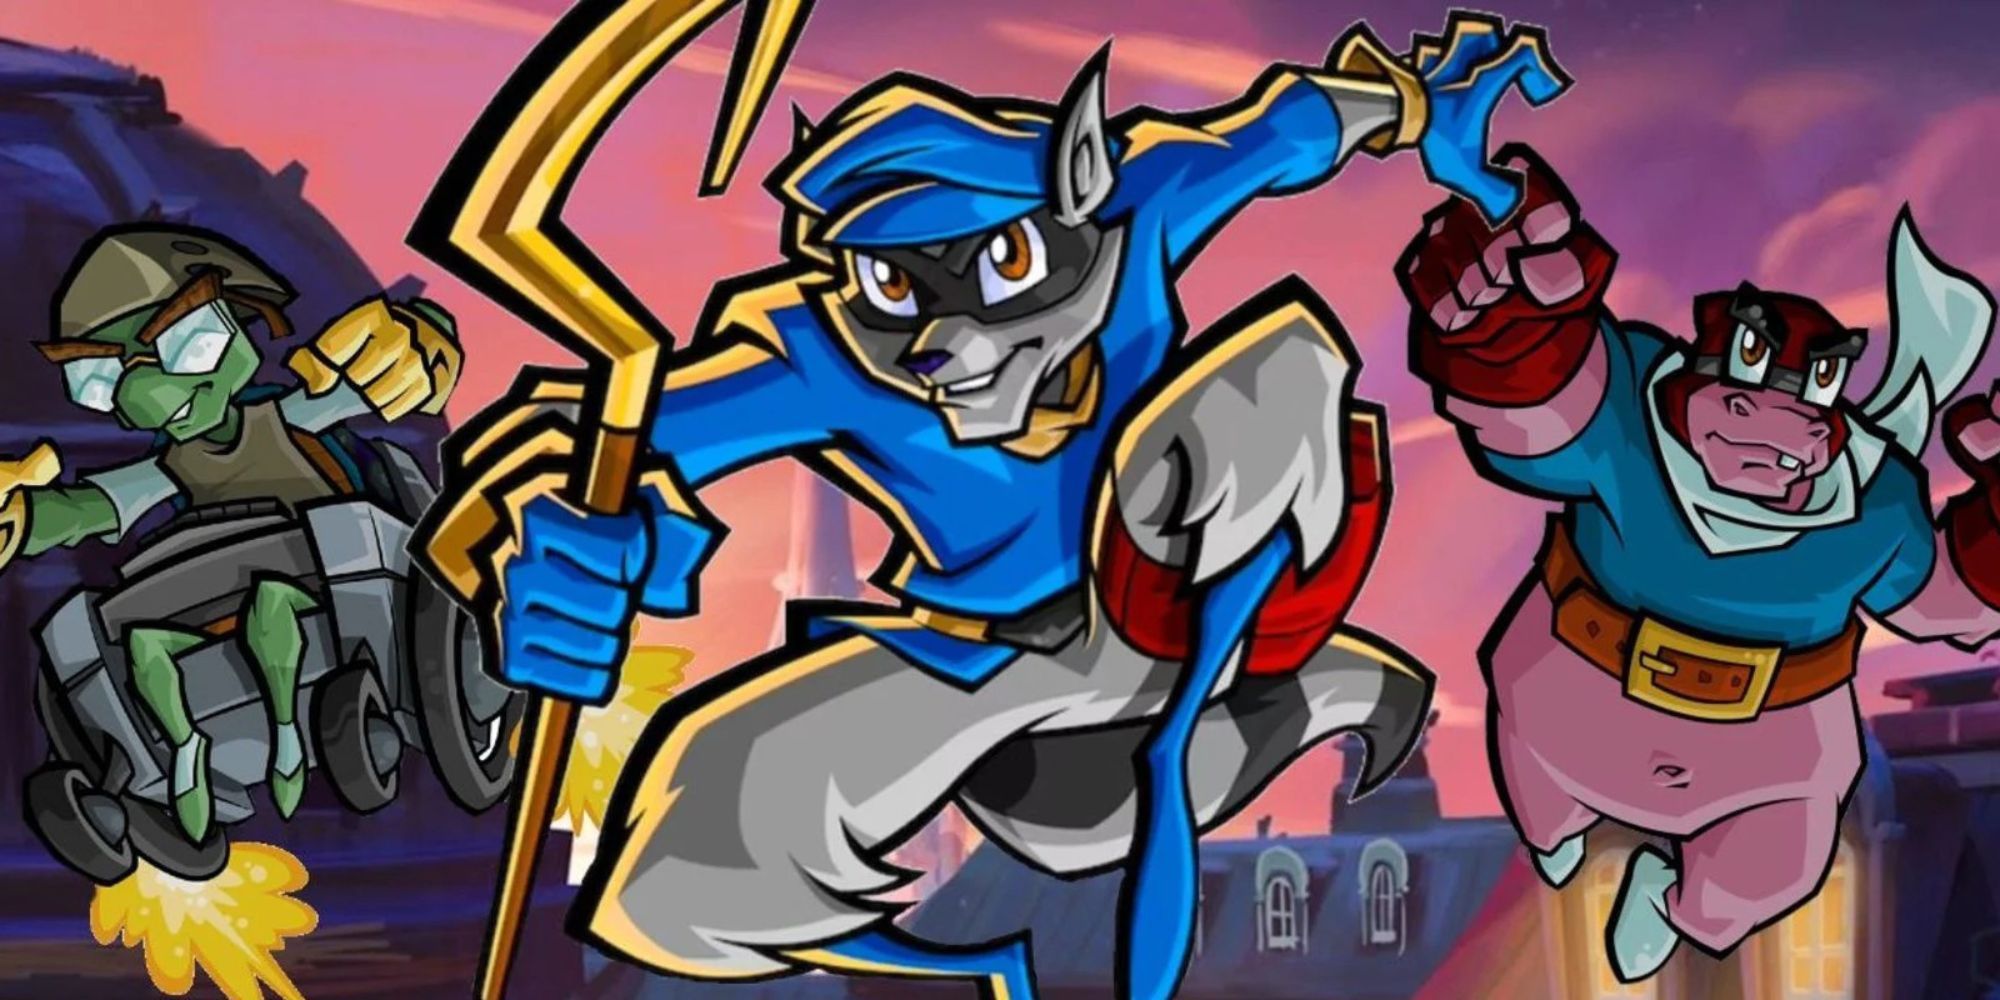 Sly Cooper, Murray and Bentley in a poster for Sly Cooper Three posing like superheroes